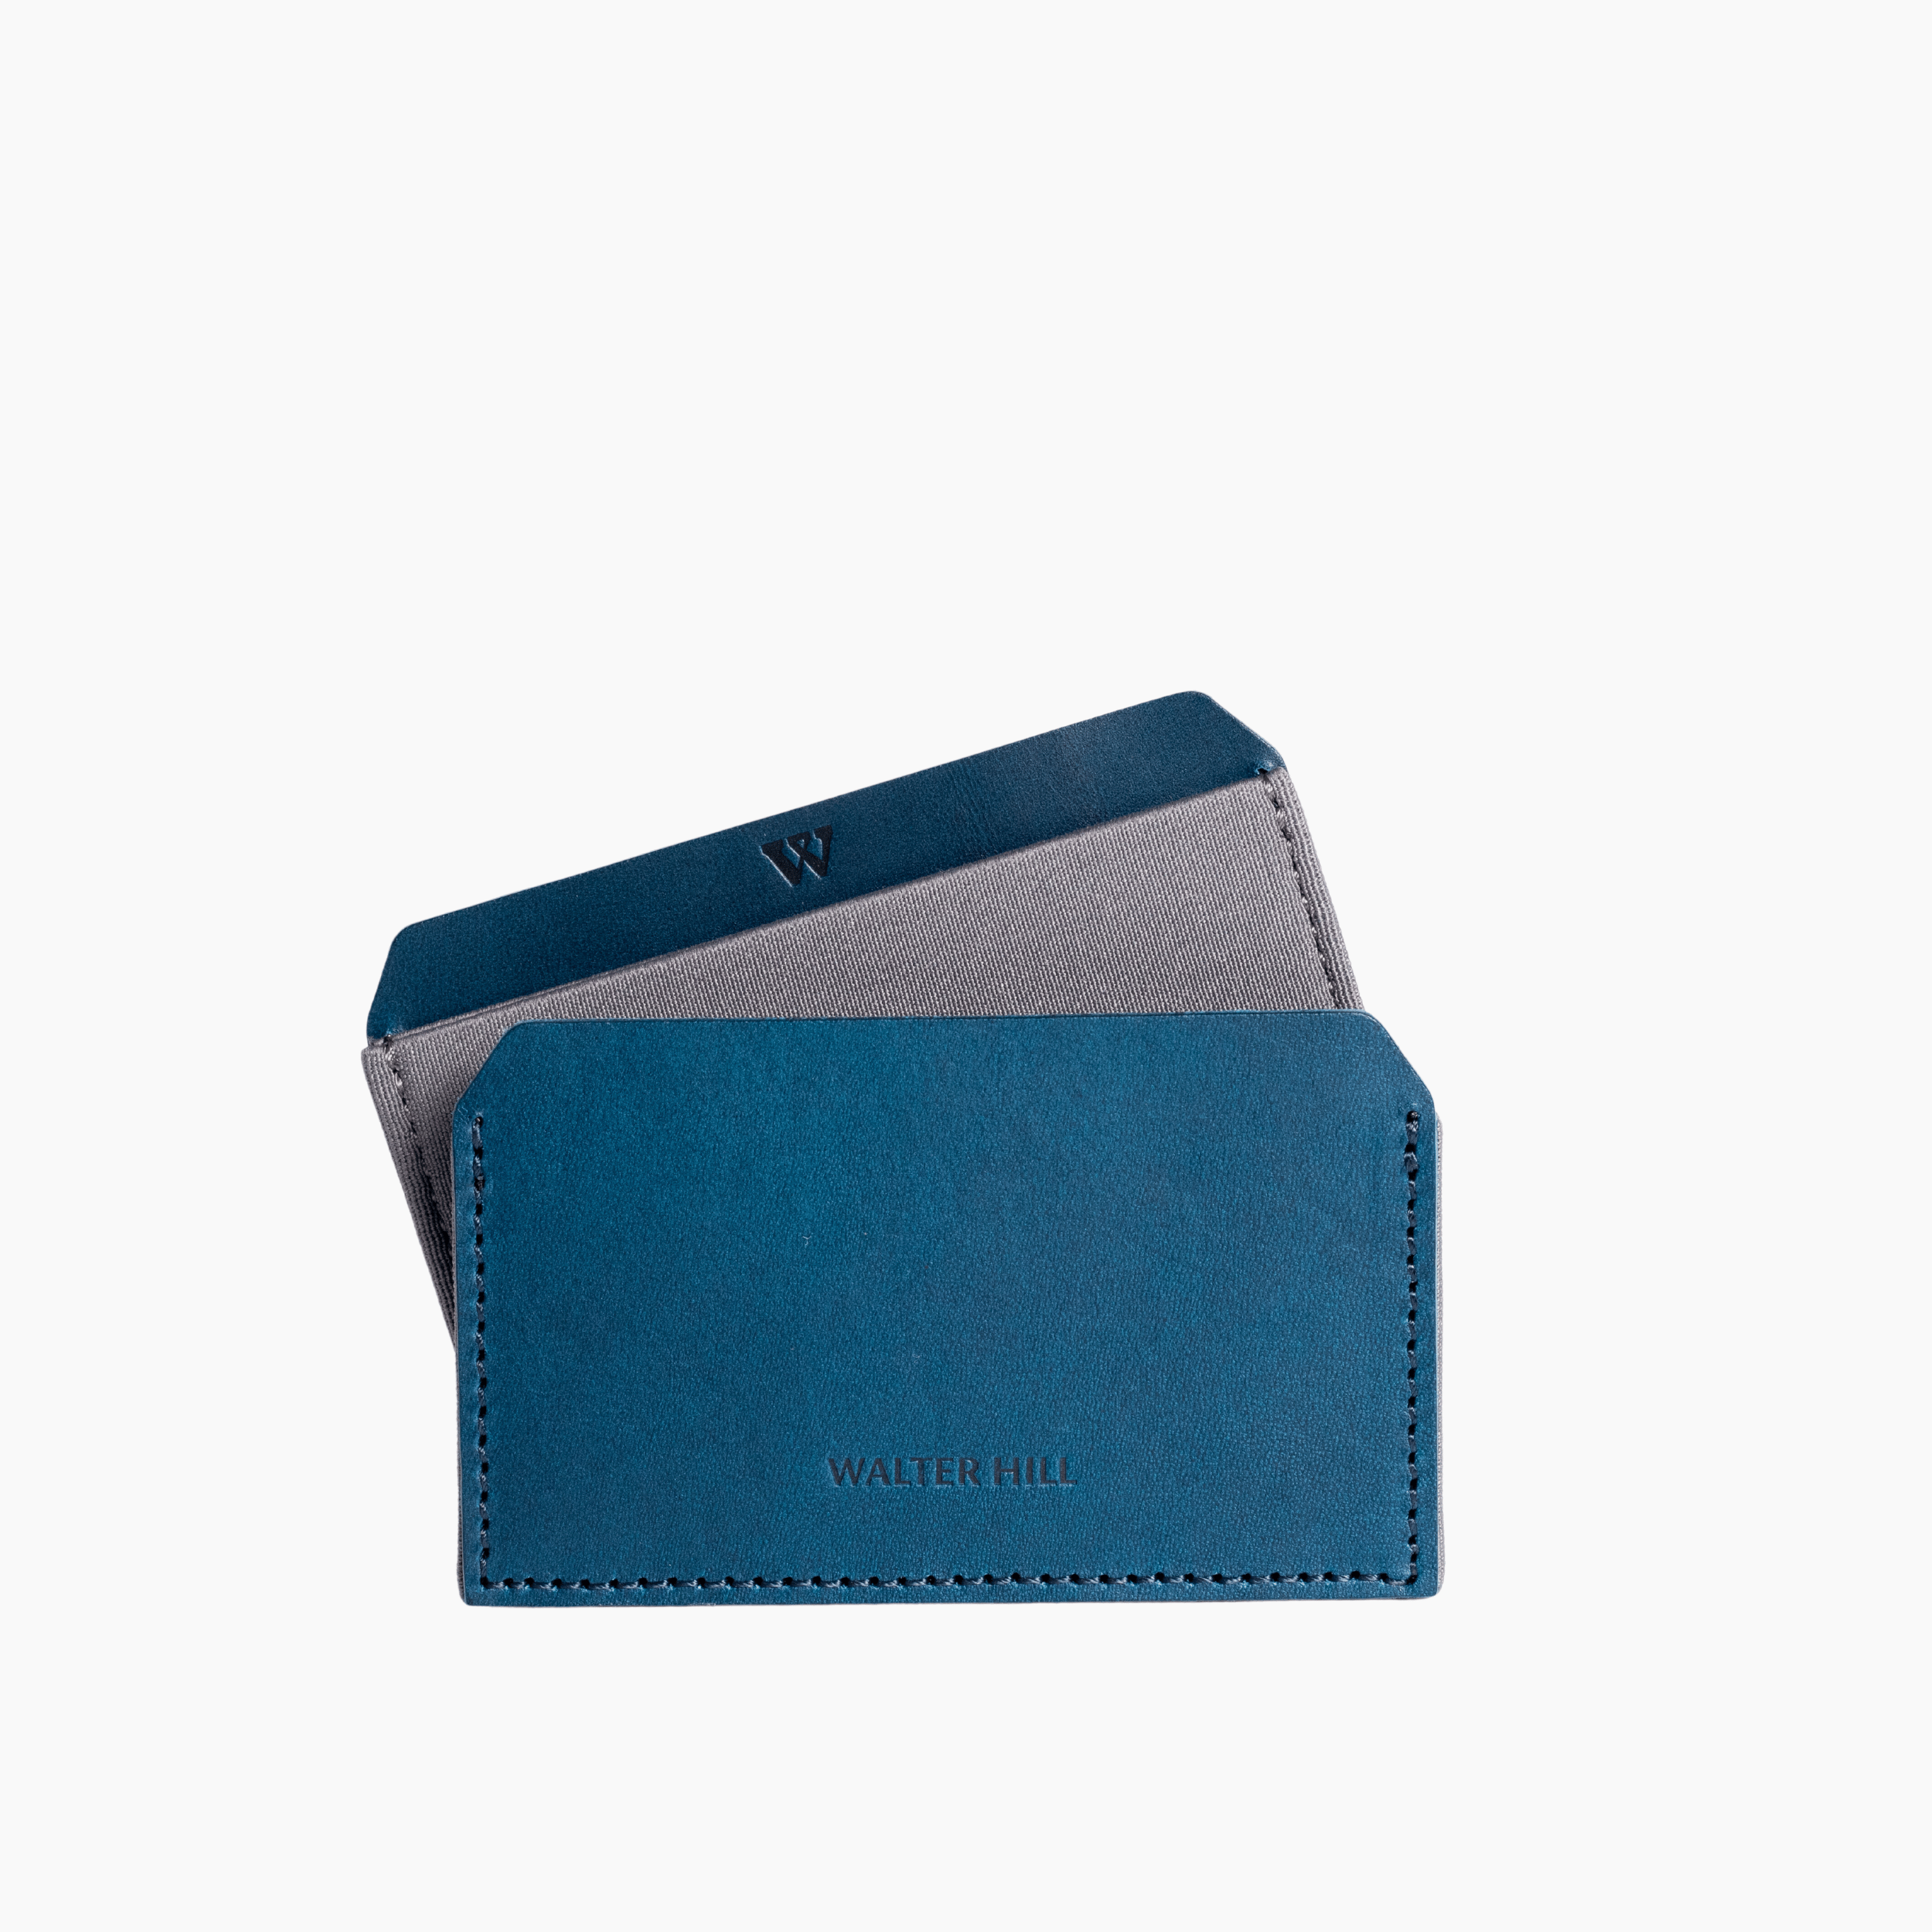 Walter Hill Wallets & Money Clips Blue / 2-8+ Cards / Italian Vegetable Tanned Leather CARD HOLDER WALLET - BLUE